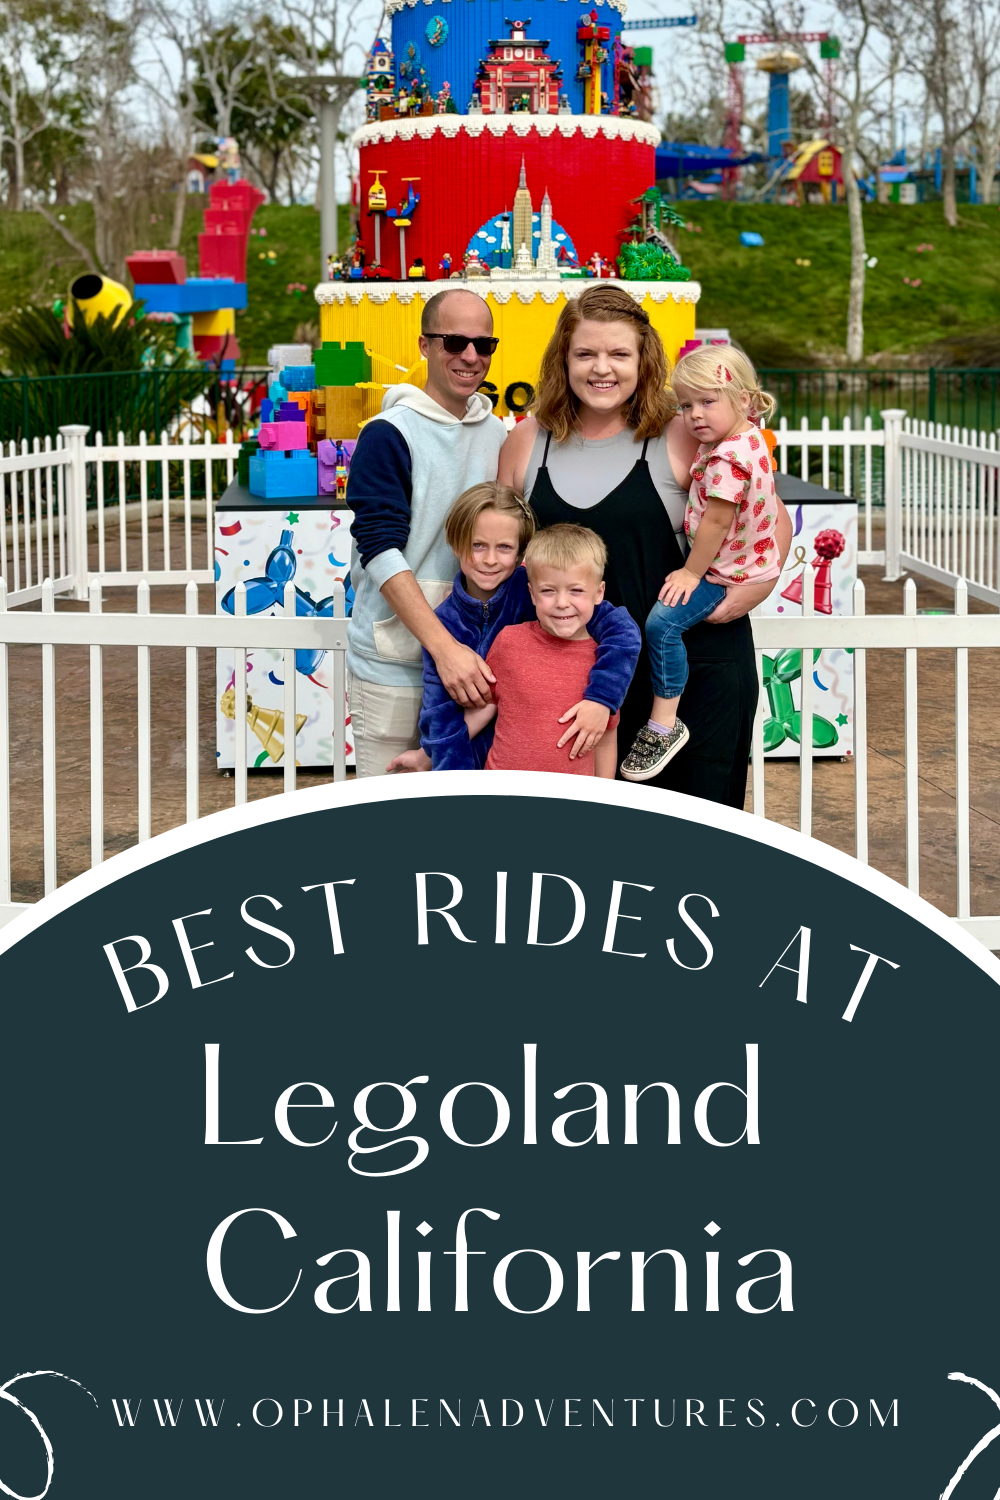 Best rides at Legoland California, family of five pictured there | O'Phalen Adventures